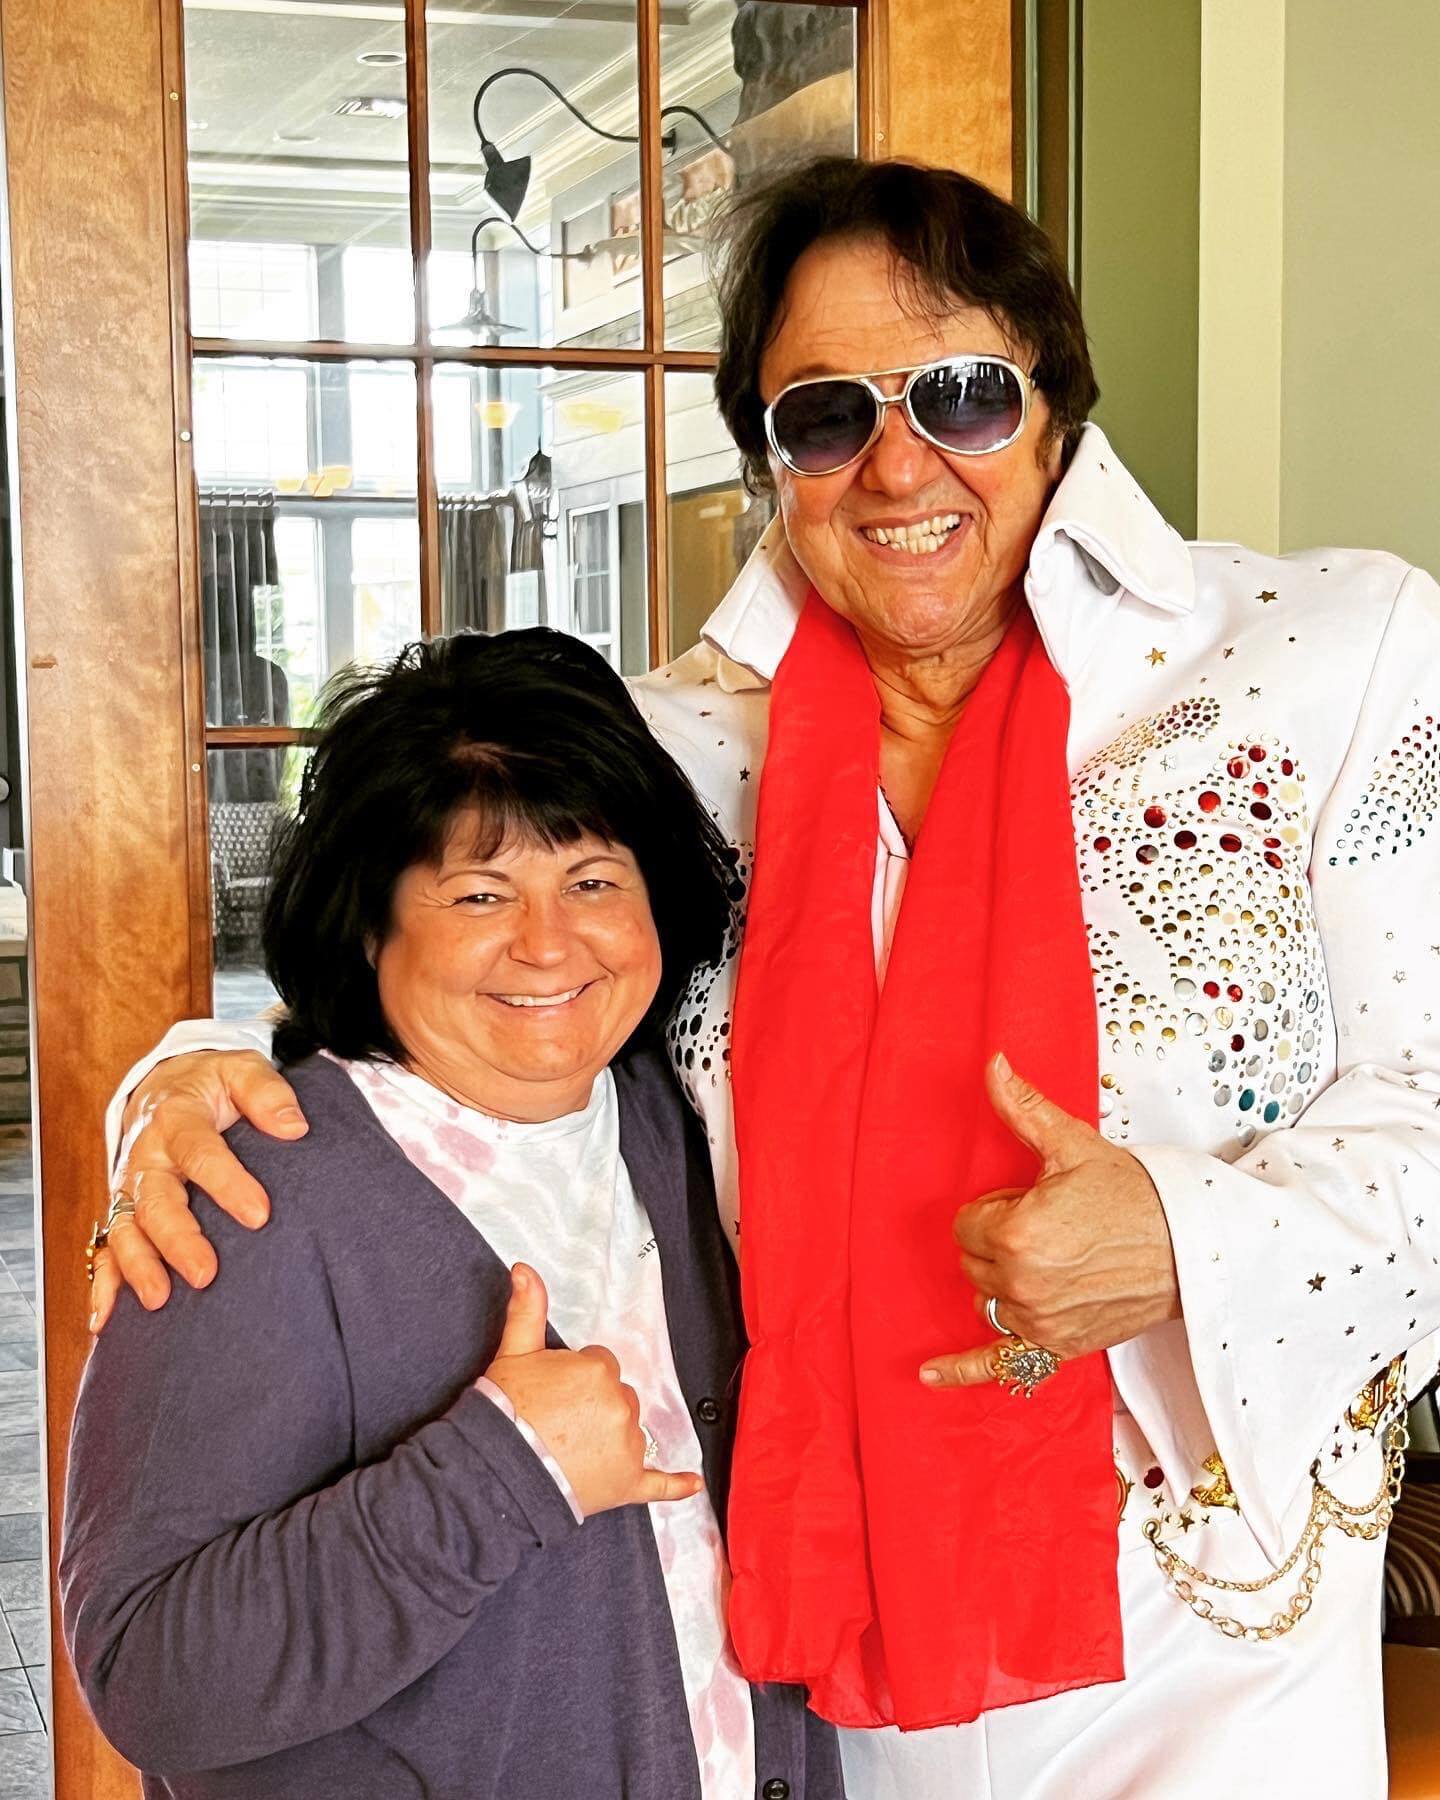 Paul Floriano doing an Elvis impersonation, standing next to a satisfied customer